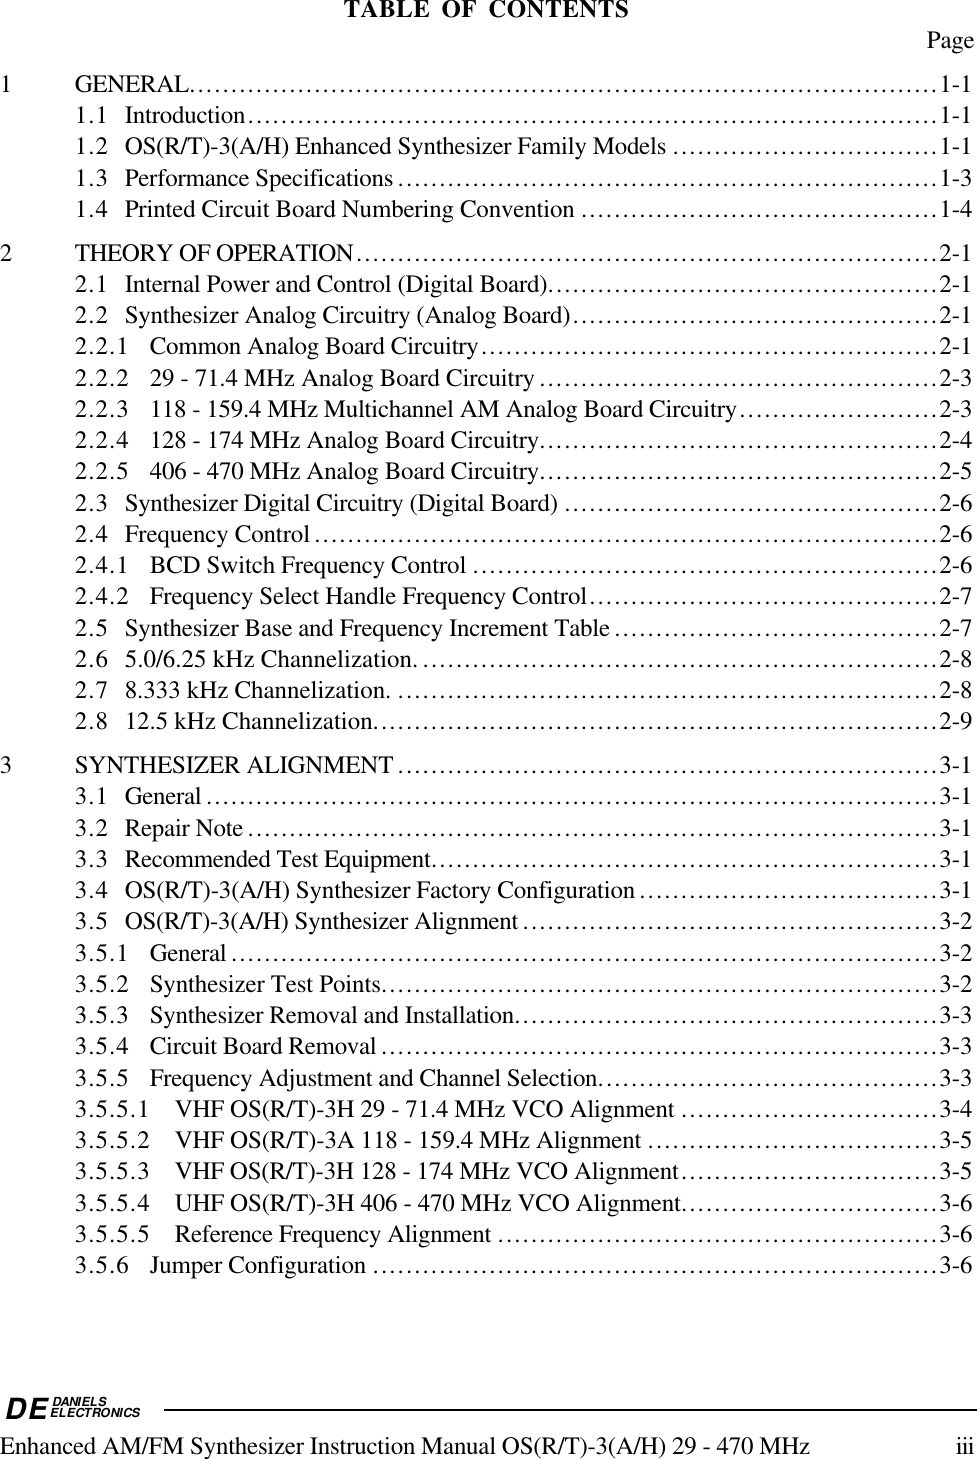 DEDANIELSELECTRONICSEnhanced AM/FM Synthesizer Instruction Manual OS(R/T)-3(A/H) 29 - 470 MHz iiiTABLE OF CONTENTS Page1 GENERAL..........................................................................................1-11.1 Introduction...................................................................................1-11.2 OS(R/T)-3(A/H) Enhanced Synthesizer Family Models ................................1-11.3 Performance Specifications .................................................................1-31.4 Printed Circuit Board Numbering Convention ...........................................1-42 THEORY OF OPERATION......................................................................2-12.1 Internal Power and Control (Digital Board)...............................................2-12.2 Synthesizer Analog Circuitry (Analog Board)............................................2-12.2.1 Common Analog Board Circuitry.......................................................2-12.2.2 29 - 71.4 MHz Analog Board Circuitry ................................................2-32.2.3 118 - 159.4 MHz Multichannel AM Analog Board Circuitry........................2-32.2.4 128 - 174 MHz Analog Board Circuitry................................................2-42.2.5 406 - 470 MHz Analog Board Circuitry................................................2-52.3 Synthesizer Digital Circuitry (Digital Board) .............................................2-62.4 Frequency Control ...........................................................................2-62.4.1 BCD Switch Frequency Control ........................................................2-62.4.2 Frequency Select Handle Frequency Control..........................................2-72.5 Synthesizer Base and Frequency Increment Table .......................................2-72.6 5.0/6.25 kHz Channelization. ..............................................................2-82.7 8.333 kHz Channelization. .................................................................2-82.8 12.5 kHz Channelization....................................................................2-93 SYNTHESIZER ALIGNMENT .................................................................3-13.1 General ........................................................................................3-13.2 Repair Note ...................................................................................3-13.3 Recommended Test Equipment.............................................................3-13.4 OS(R/T)-3(A/H) Synthesizer Factory Configuration ....................................3-13.5 OS(R/T)-3(A/H) Synthesizer Alignment ..................................................3-23.5.1 General .....................................................................................3-23.5.2 Synthesizer Test Points...................................................................3-23.5.3 Synthesizer Removal and Installation...................................................3-33.5.4 Circuit Board Removal ...................................................................3-33.5.5 Frequency Adjustment and Channel Selection.........................................3-33.5.5.1 VHF OS(R/T)-3H 29 - 71.4 MHz VCO Alignment ...............................3-43.5.5.2 VHF OS(R/T)-3A 118 - 159.4 MHz Alignment ...................................3-53.5.5.3 VHF OS(R/T)-3H 128 - 174 MHz VCO Alignment...............................3-53.5.5.4 UHF OS(R/T)-3H 406 - 470 MHz VCO Alignment...............................3-63.5.5.5 Reference Frequency Alignment .....................................................3-63.5.6 Jumper Configuration ....................................................................3-6